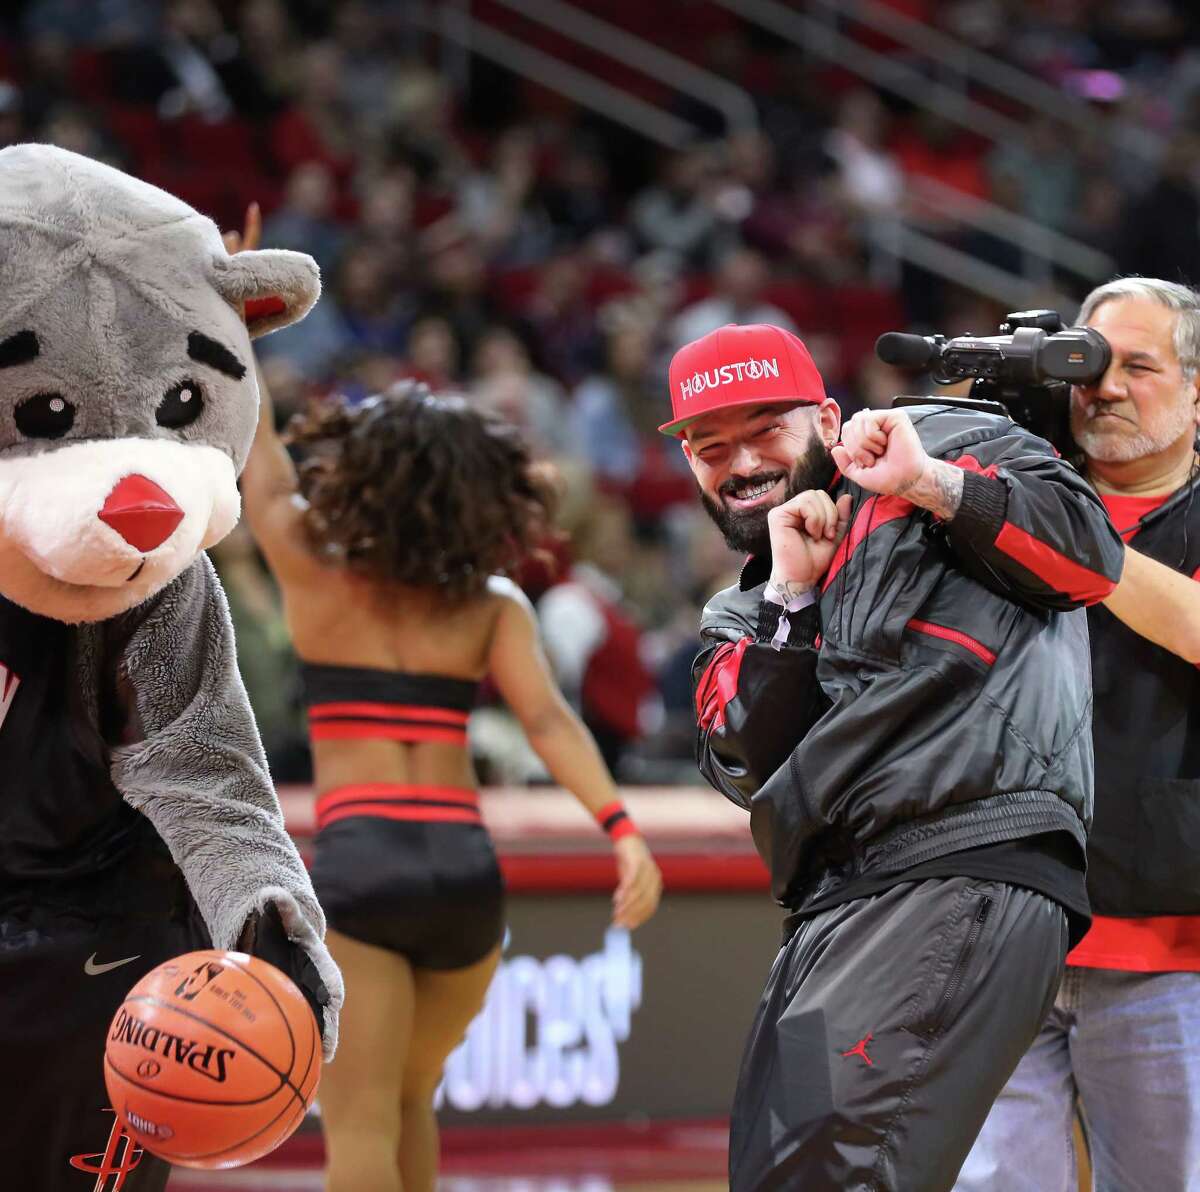 PHOTOS: See how each celebrity has done on the "First Shot" before each Rockets home game this season Houston rapper Paul Wall reacts to his missed first shot for charity before the Houston Rockets-New Orleans Pelicans game at Toyota Center on Jan. 29. Browse through the photos to see which celebrities have made their "First Shot" before Rockets home games the past two seasons ...